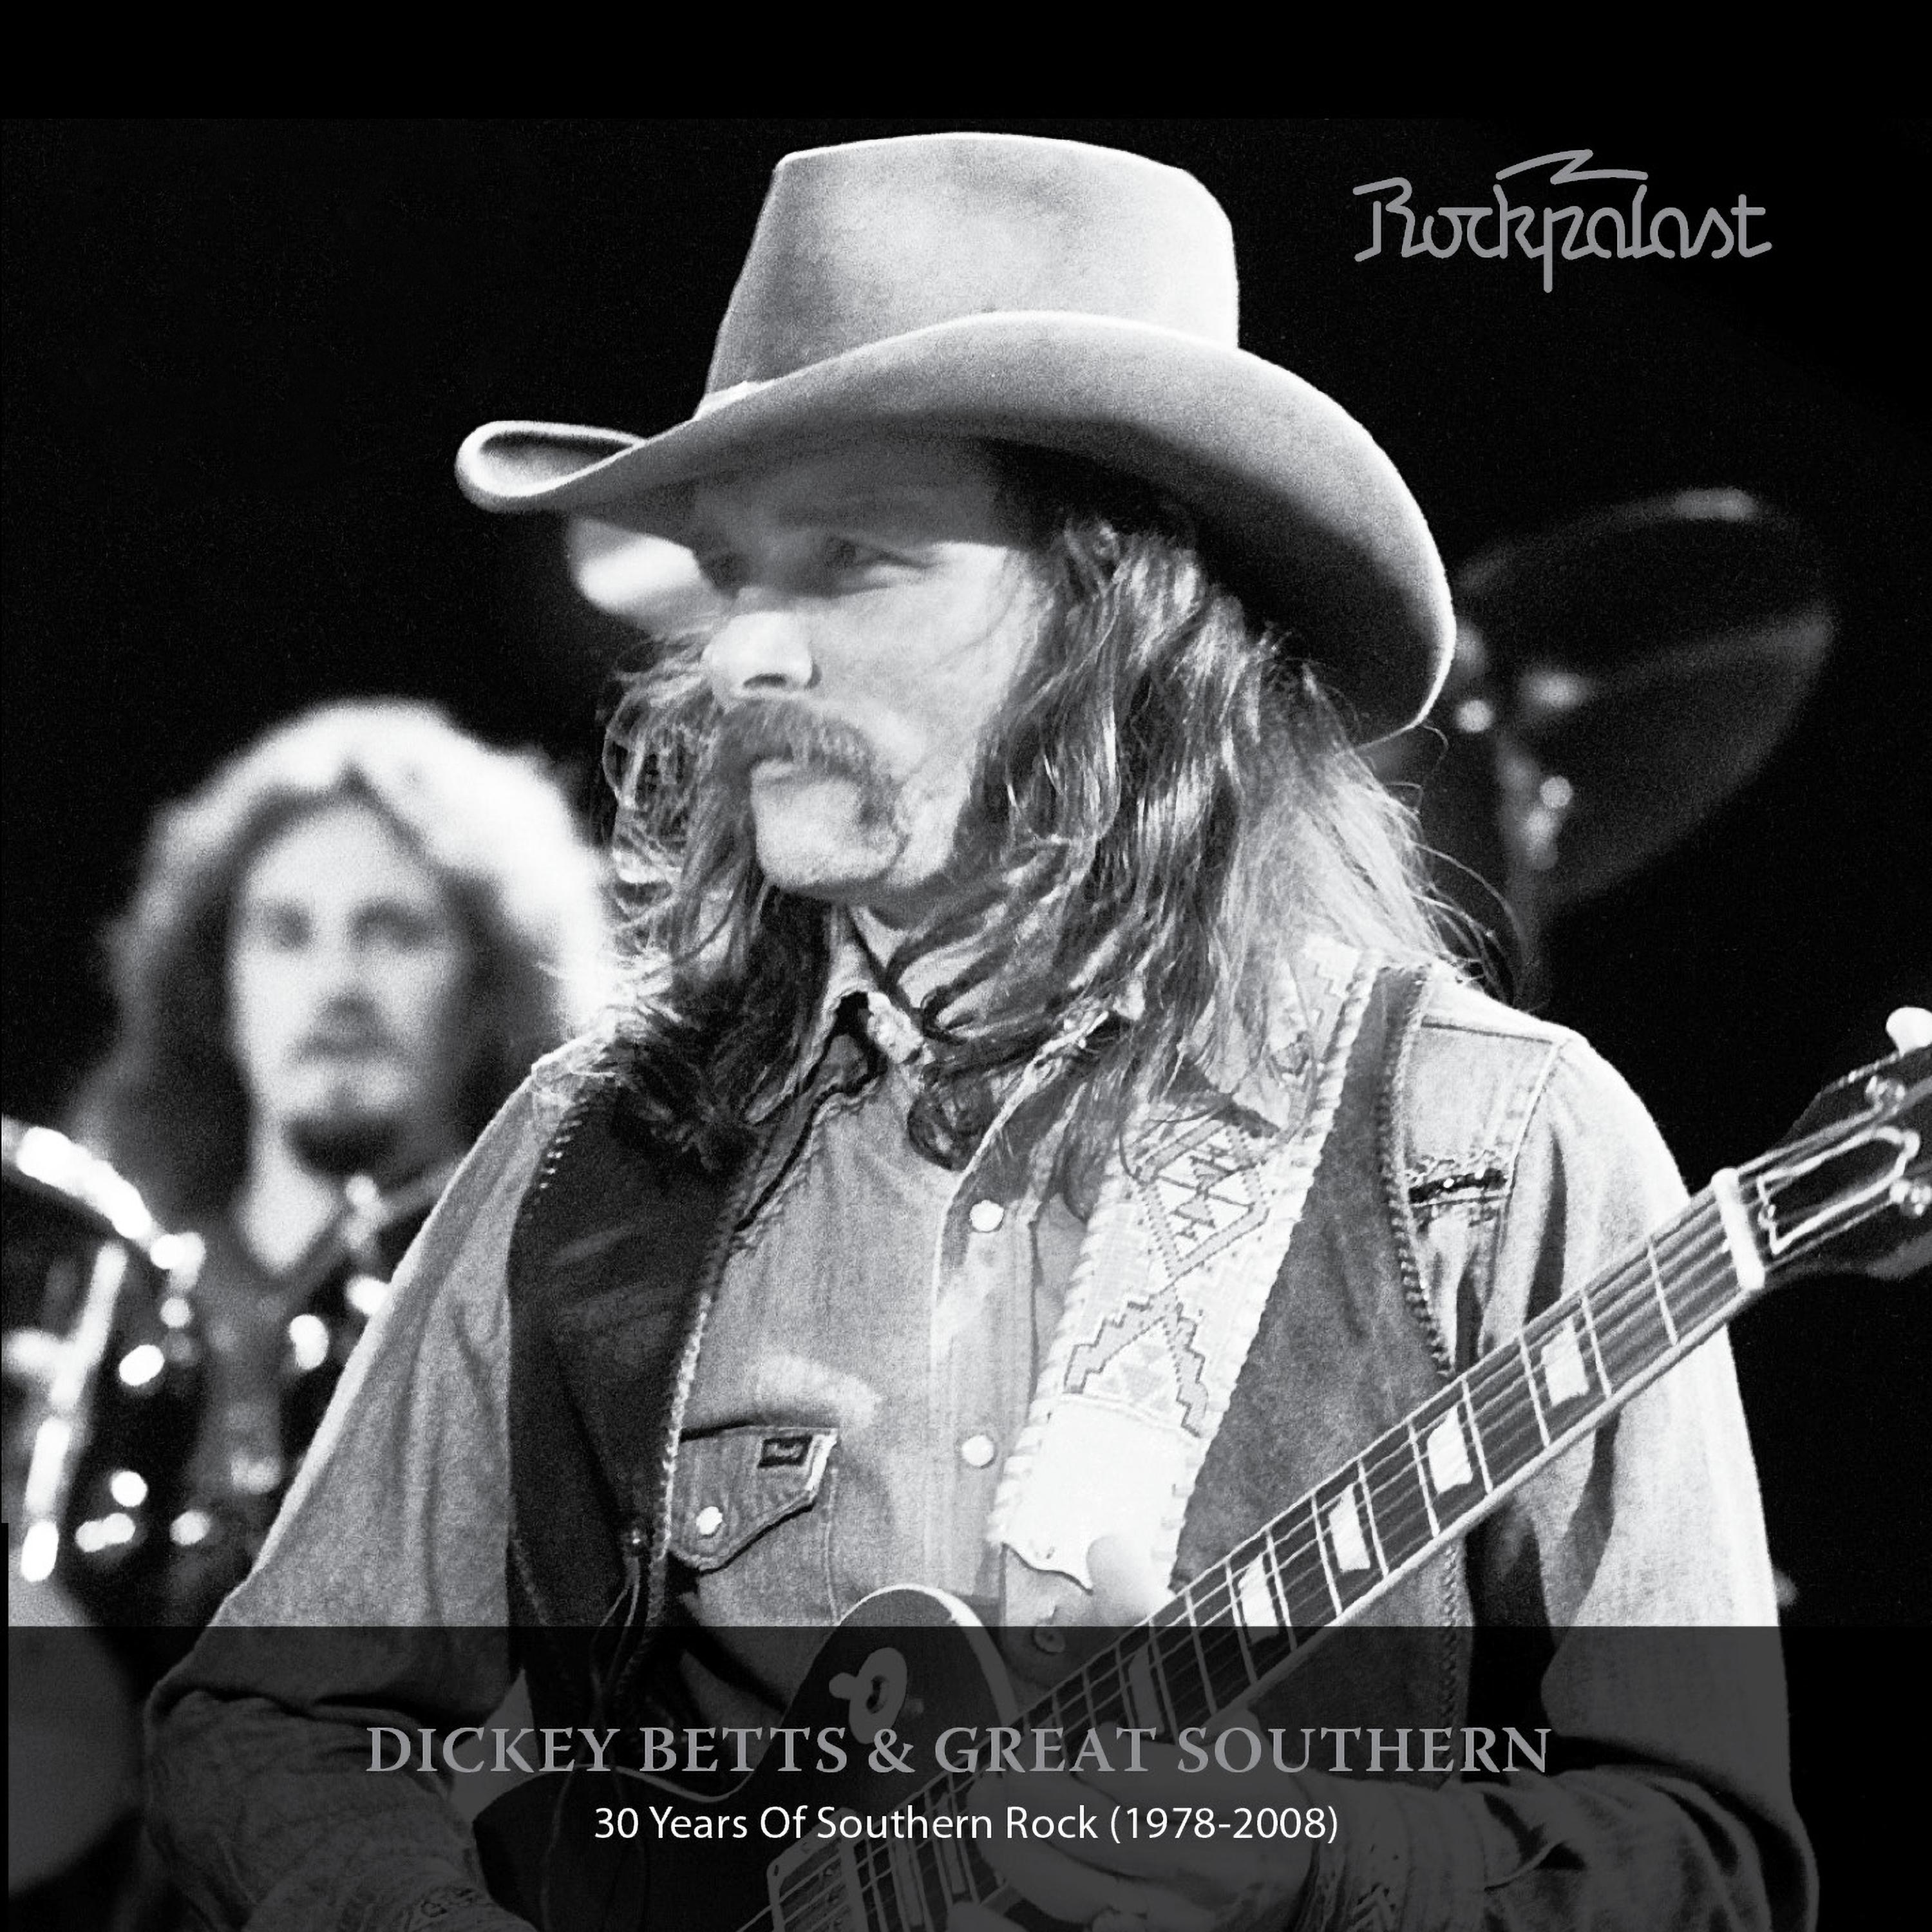 Rockpalast: 30 Years of Southern Rock (1978 - 2008)